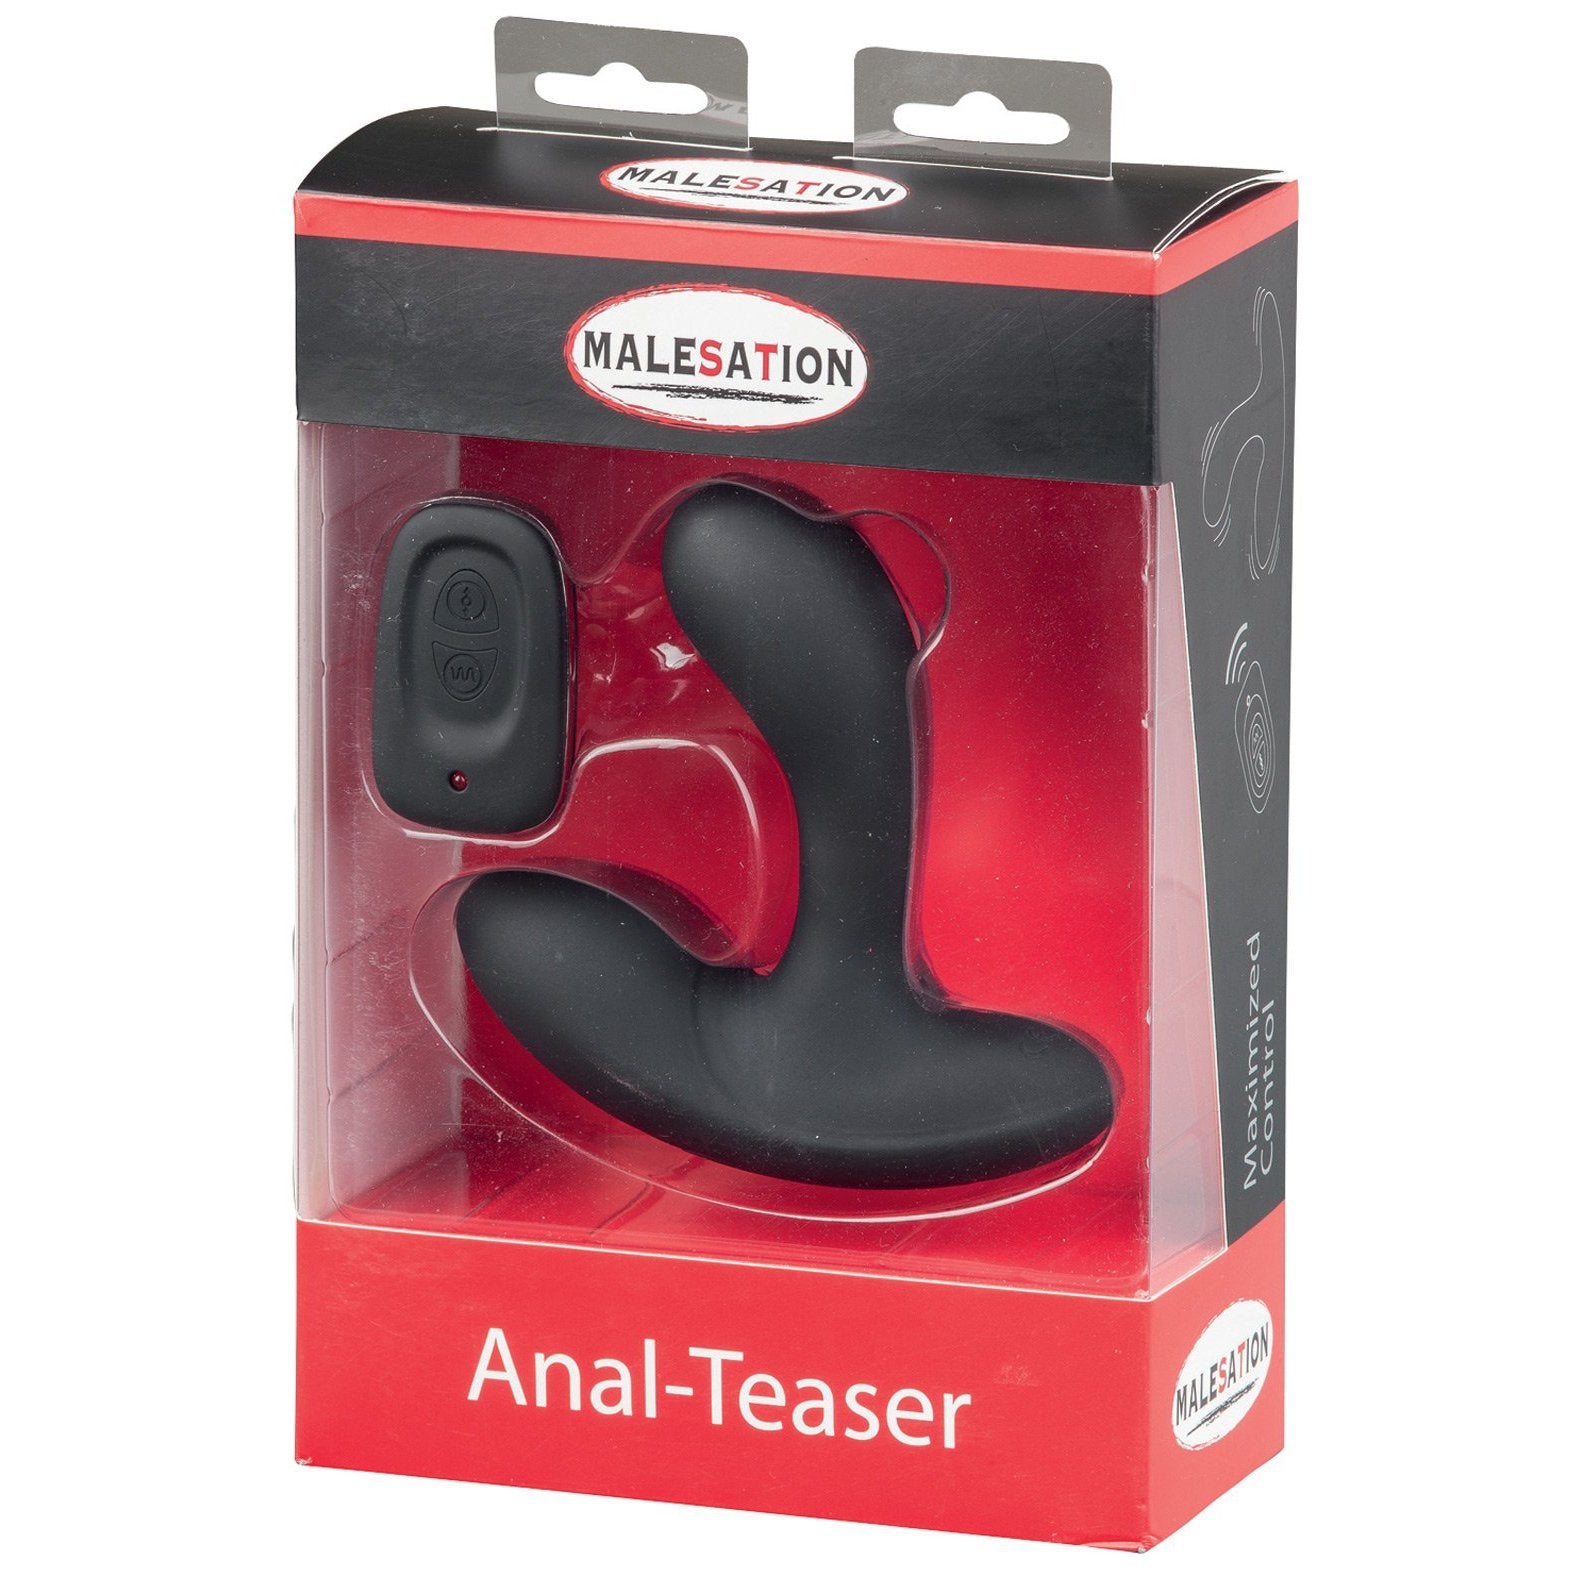 Malesation Remote Control Anal Teaser - 8 Functions